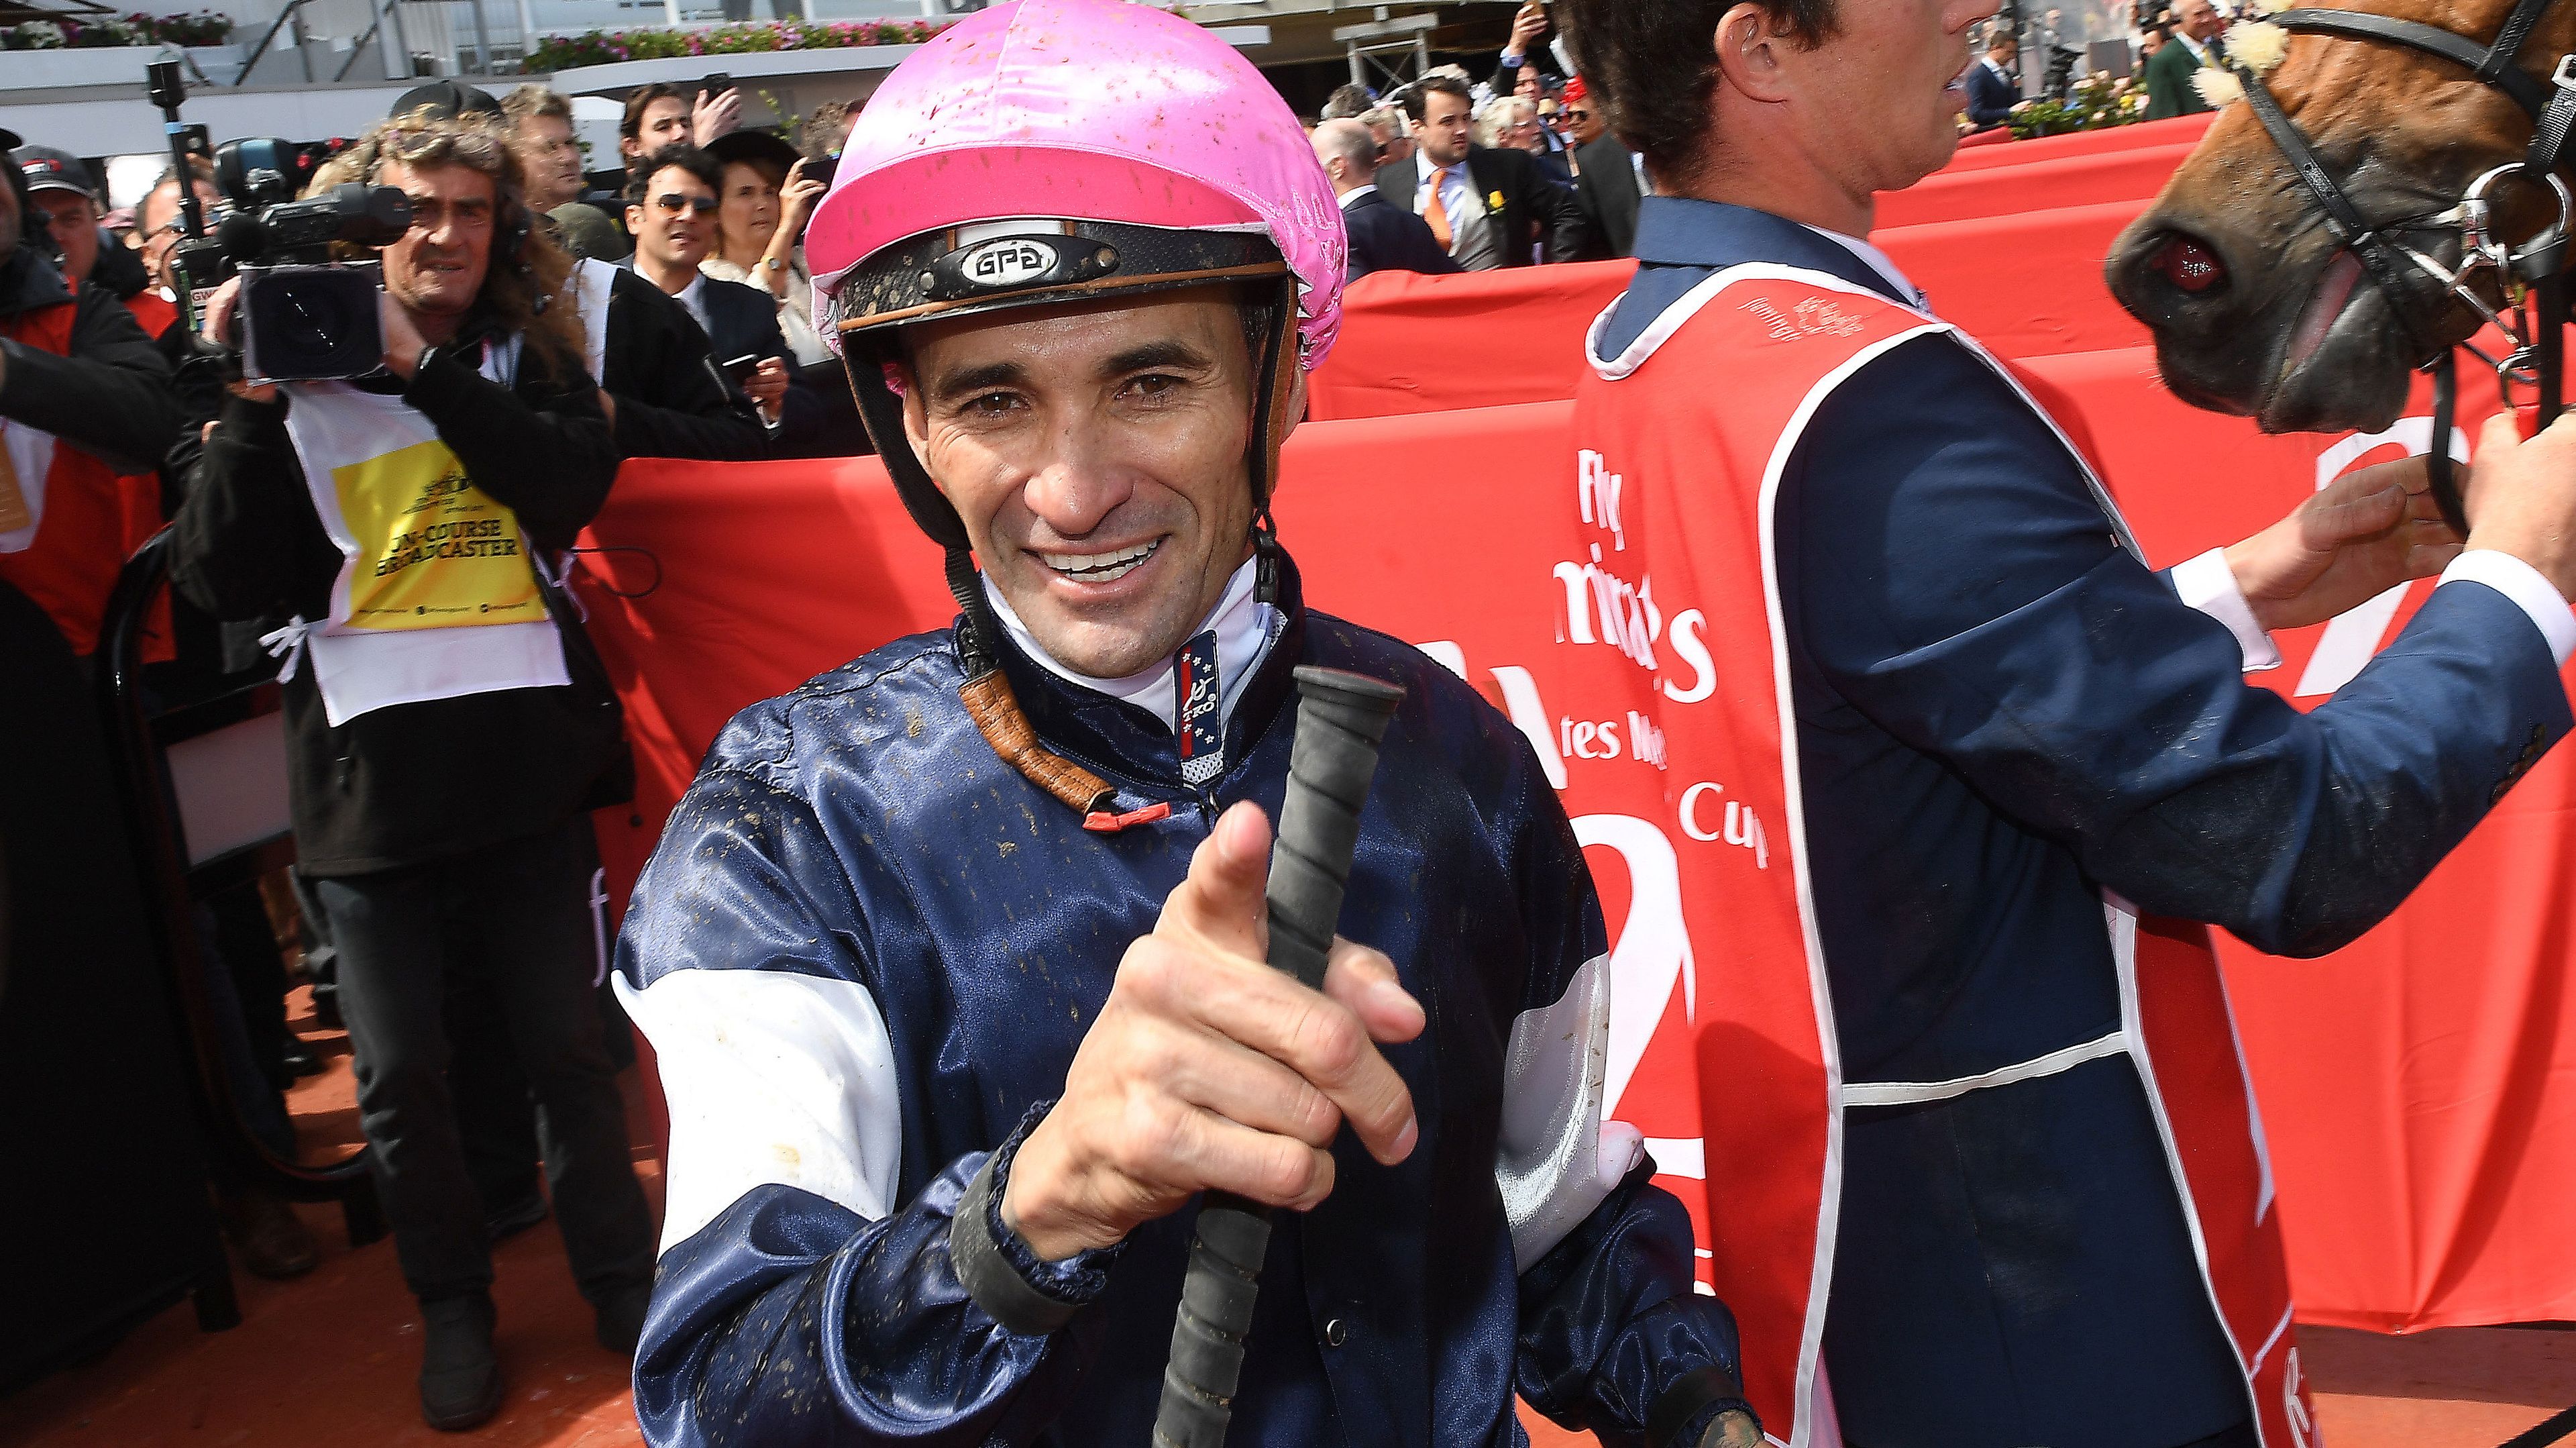 Australian Jockey Corey Brown rode Shocking to victory in the 2009 Melbourne Cup